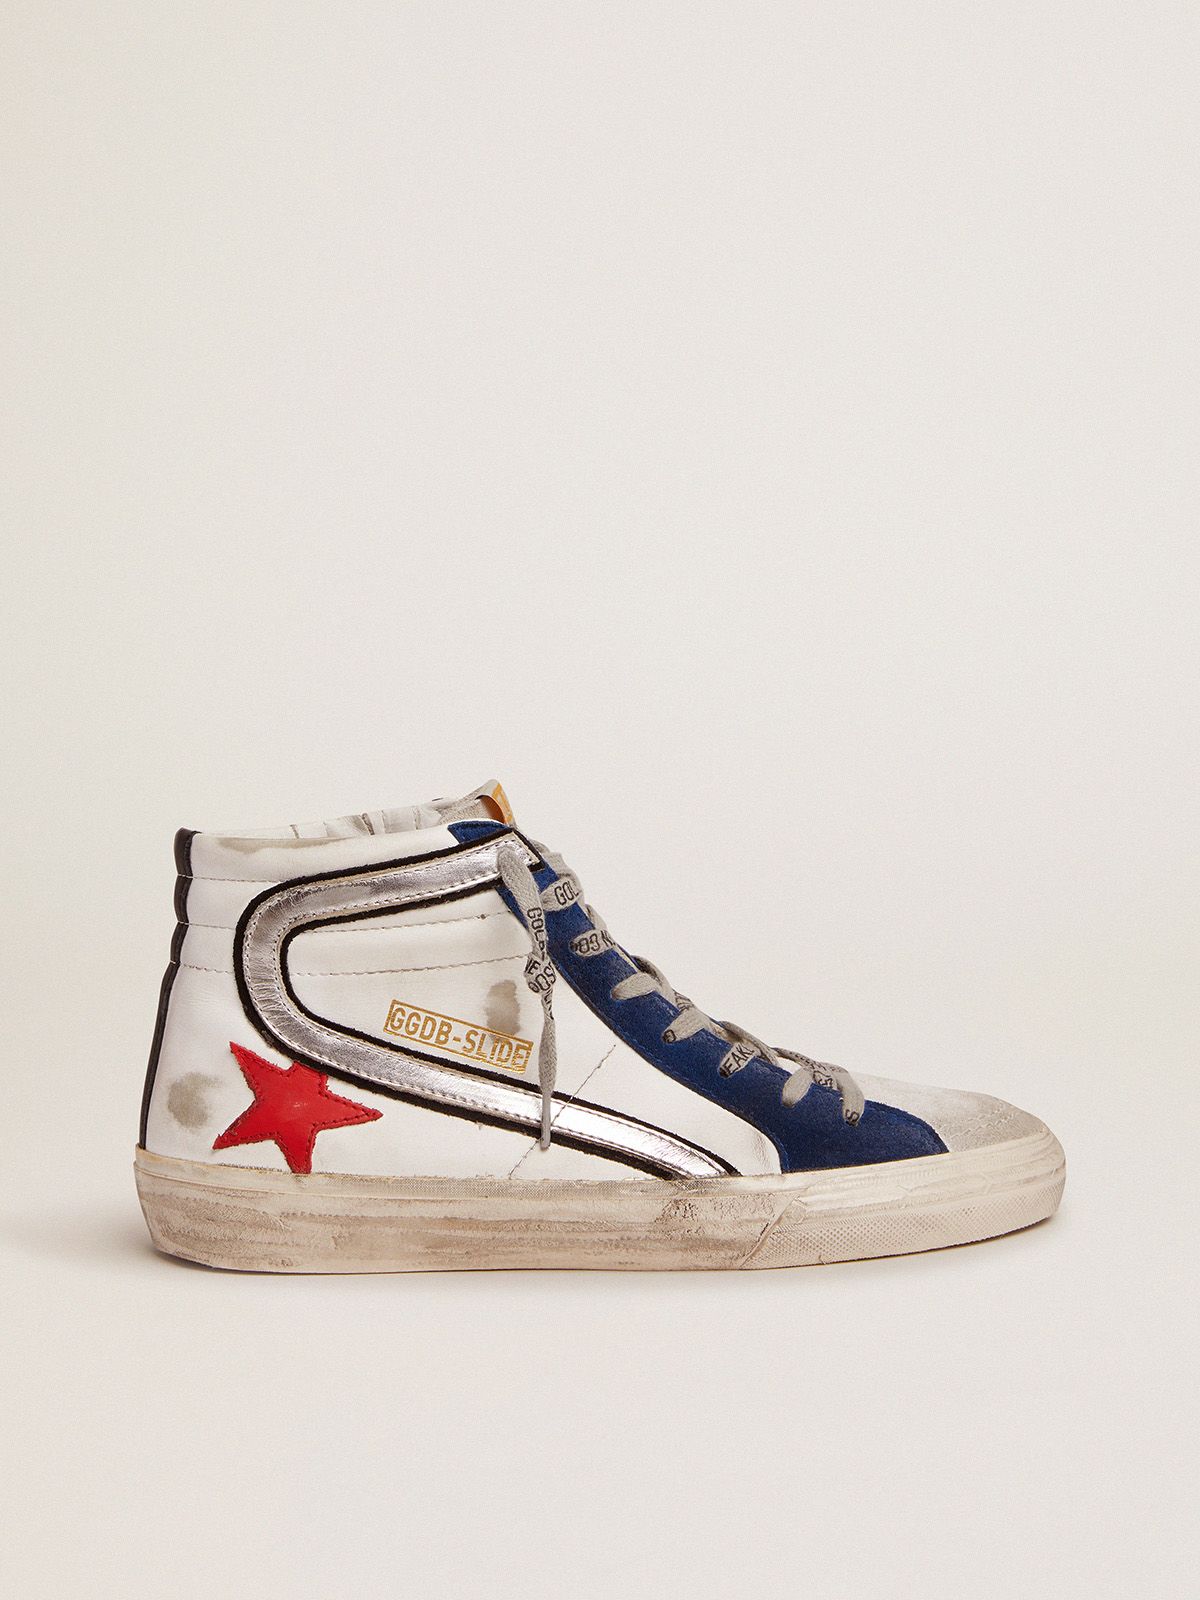 golden goose white with star red leather Slide sneakers in